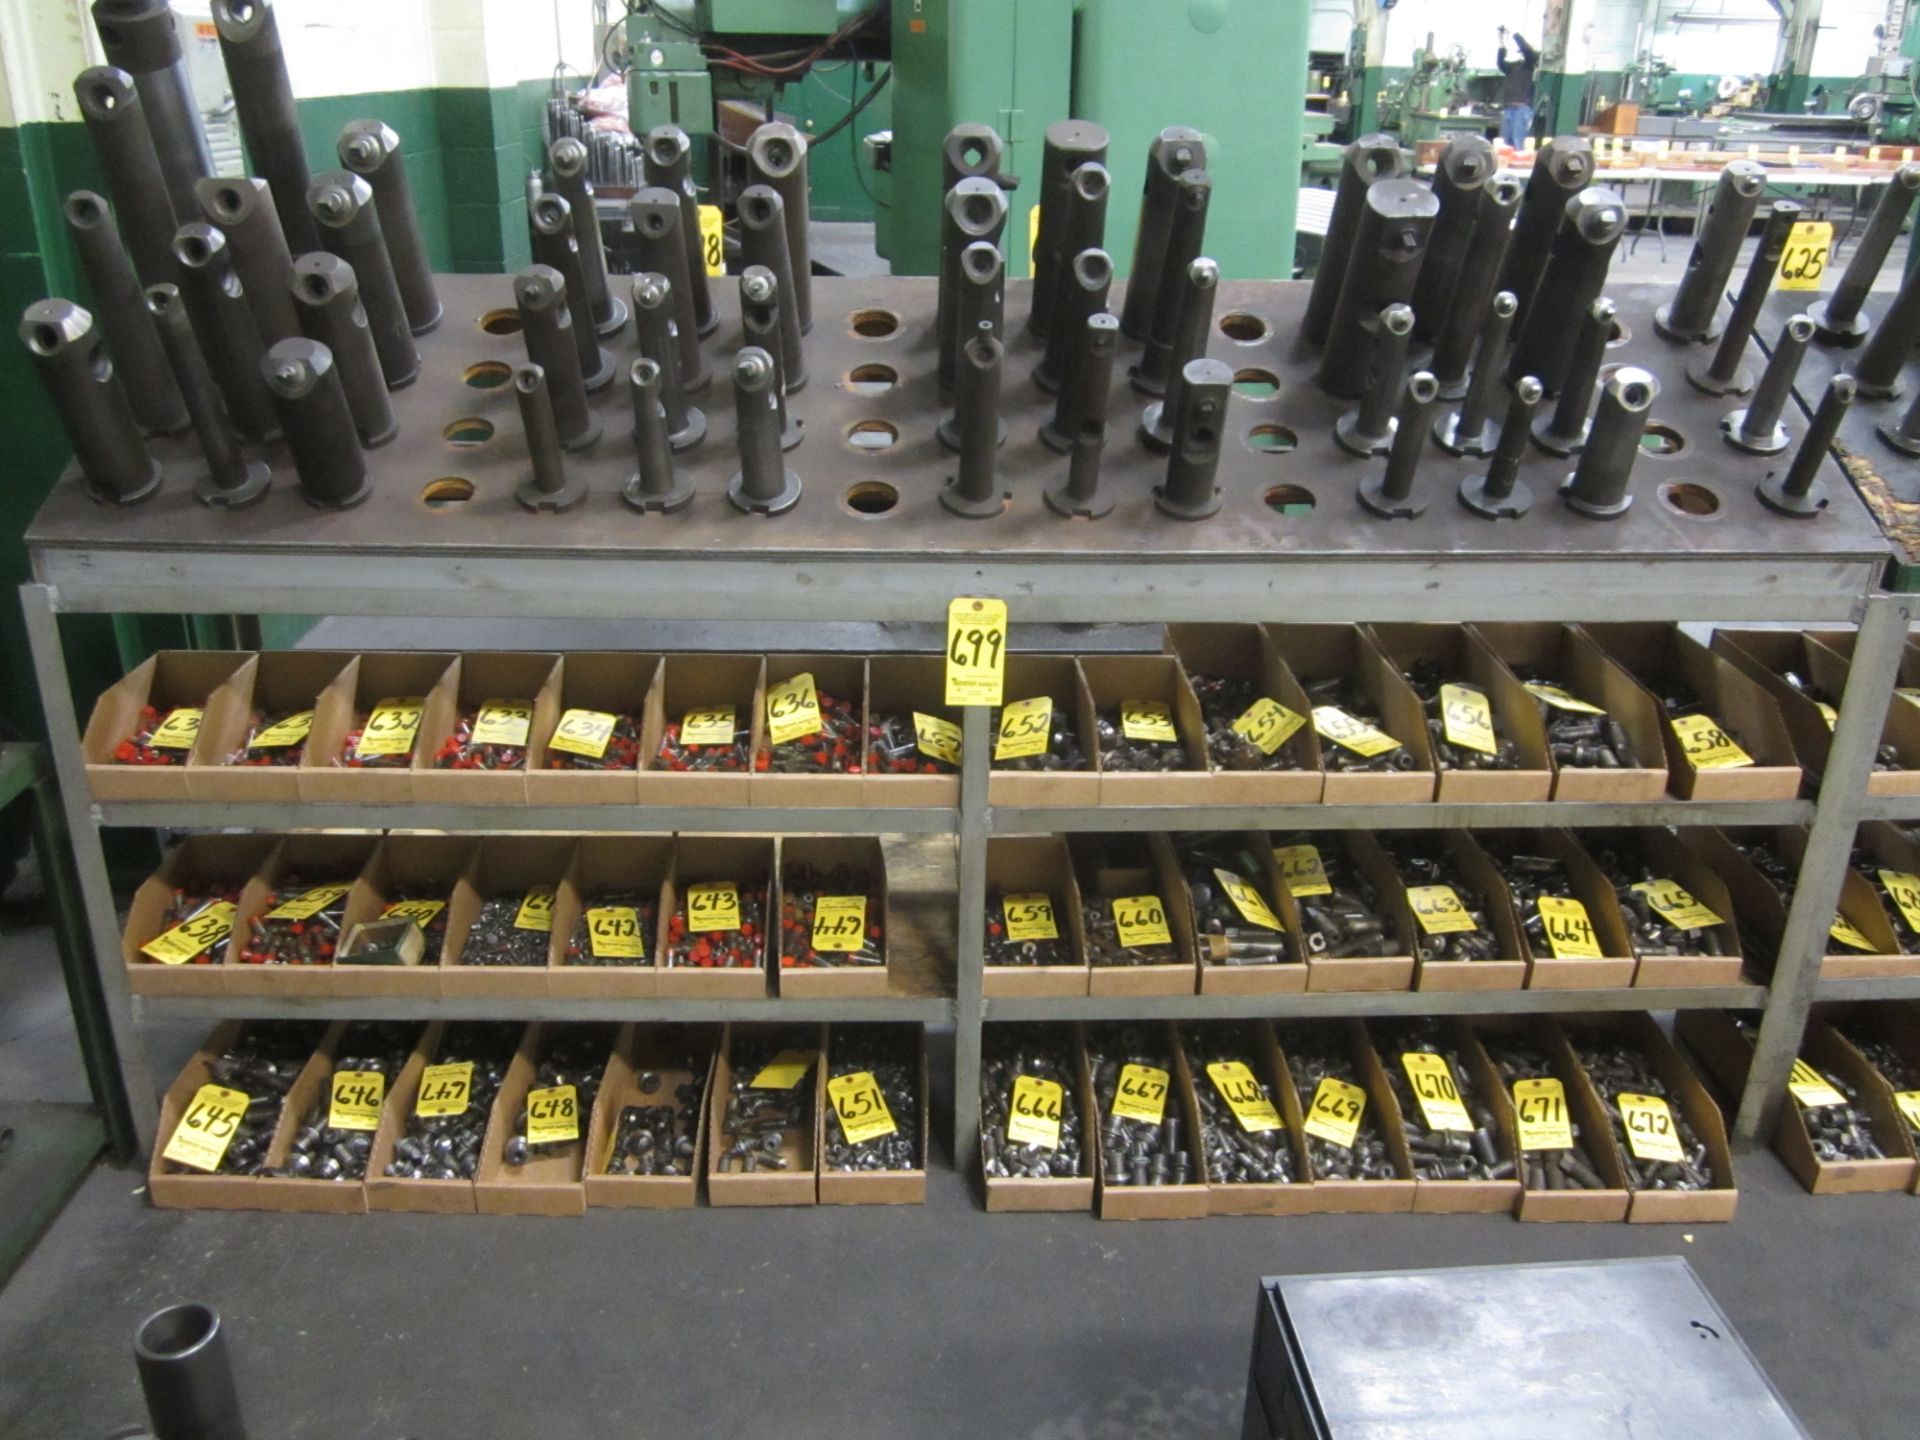 Shelving with 50 Taper Tooling Rack